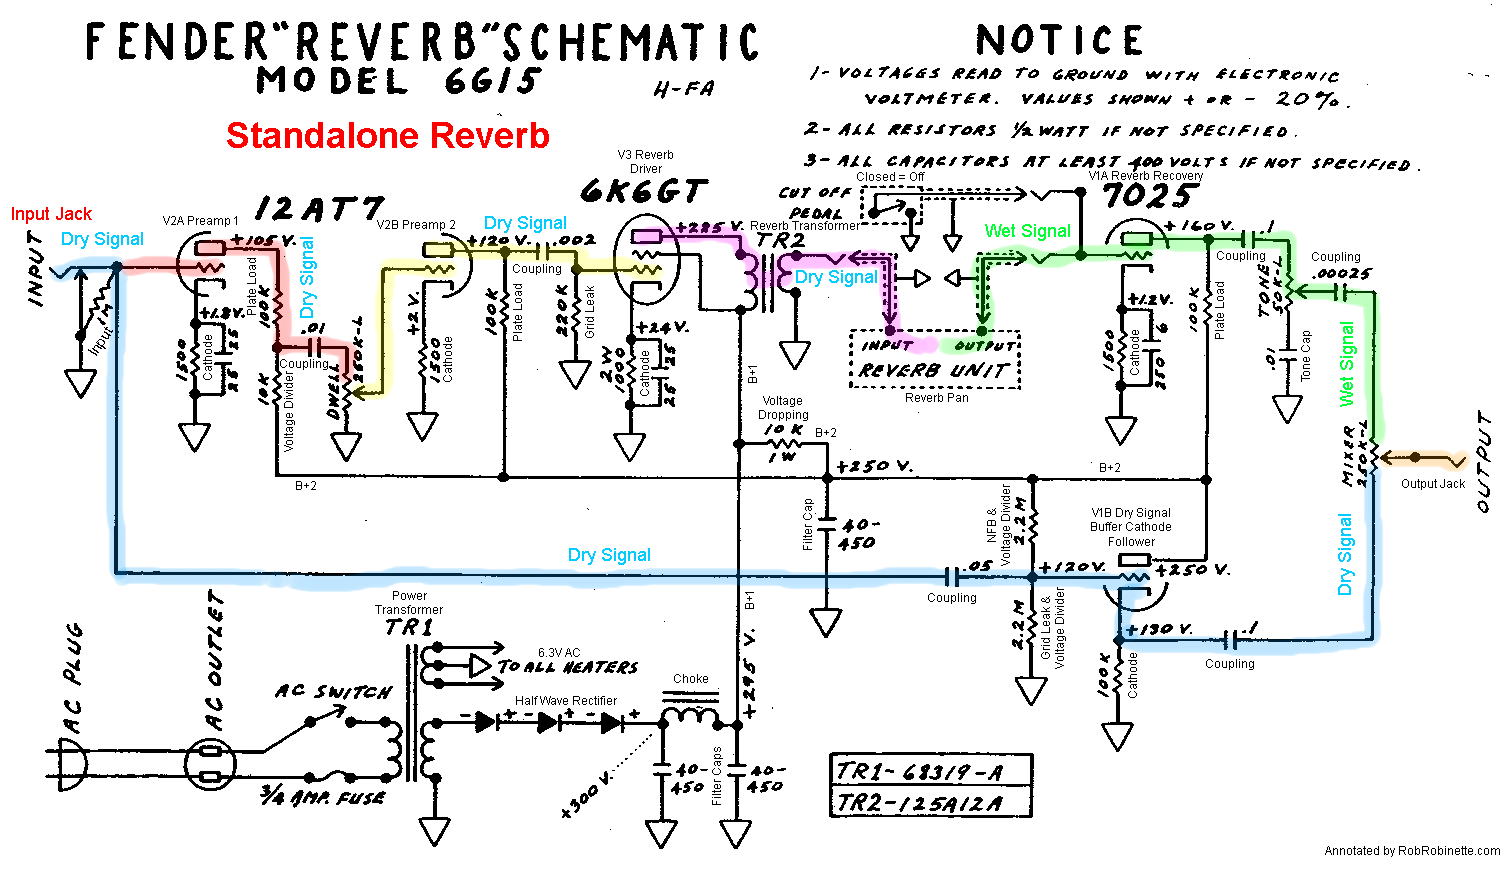 Fender_6G15_Annotated_Schematic.png